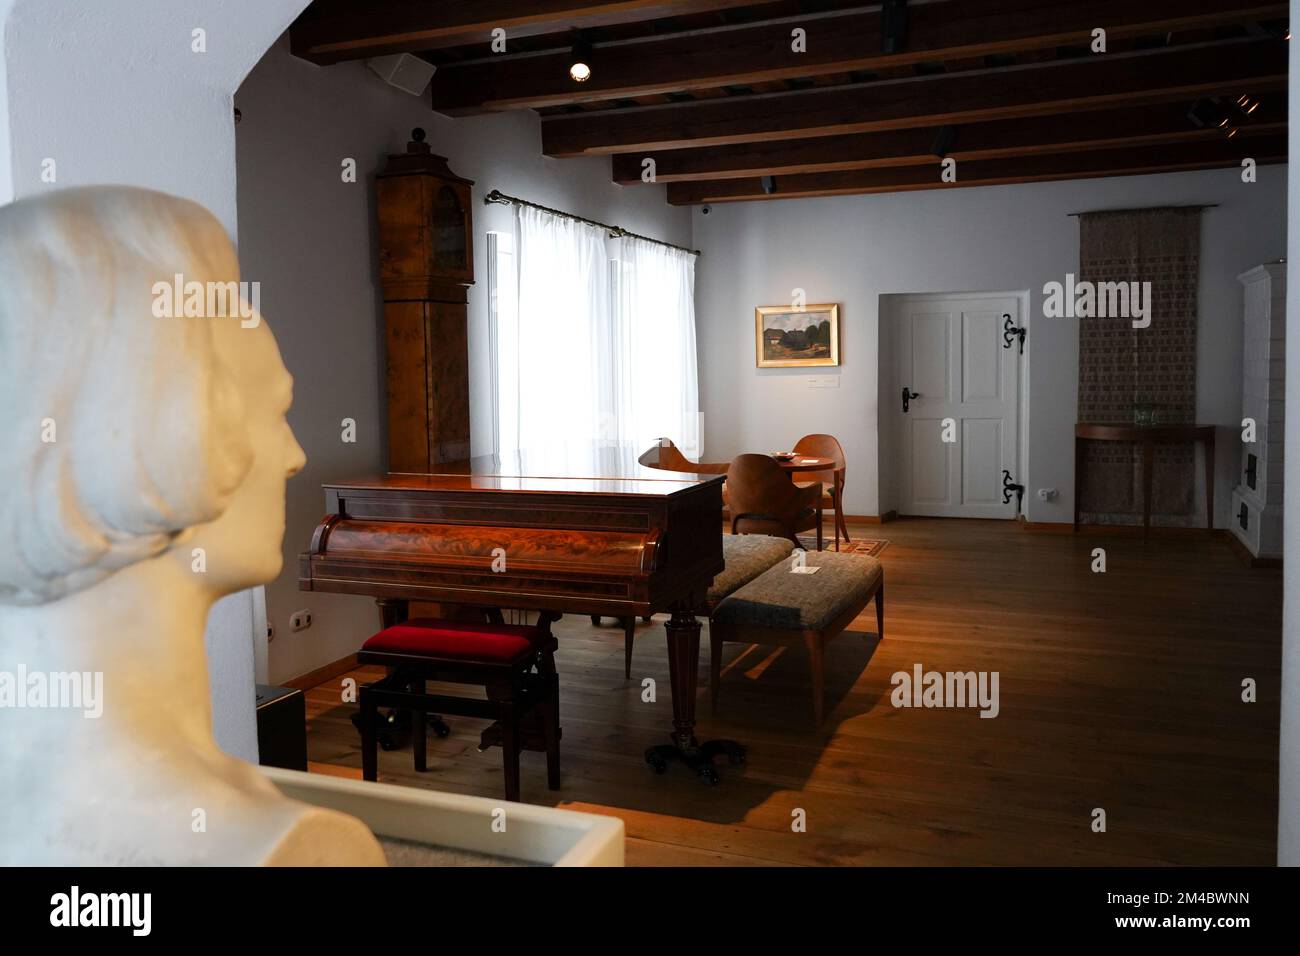 Room in old manor-house which is the Birthplace of Frederic Chopin in Zelazowa Wola, Poland. There's  brown 19th century Erard - period piano. Stock Photo